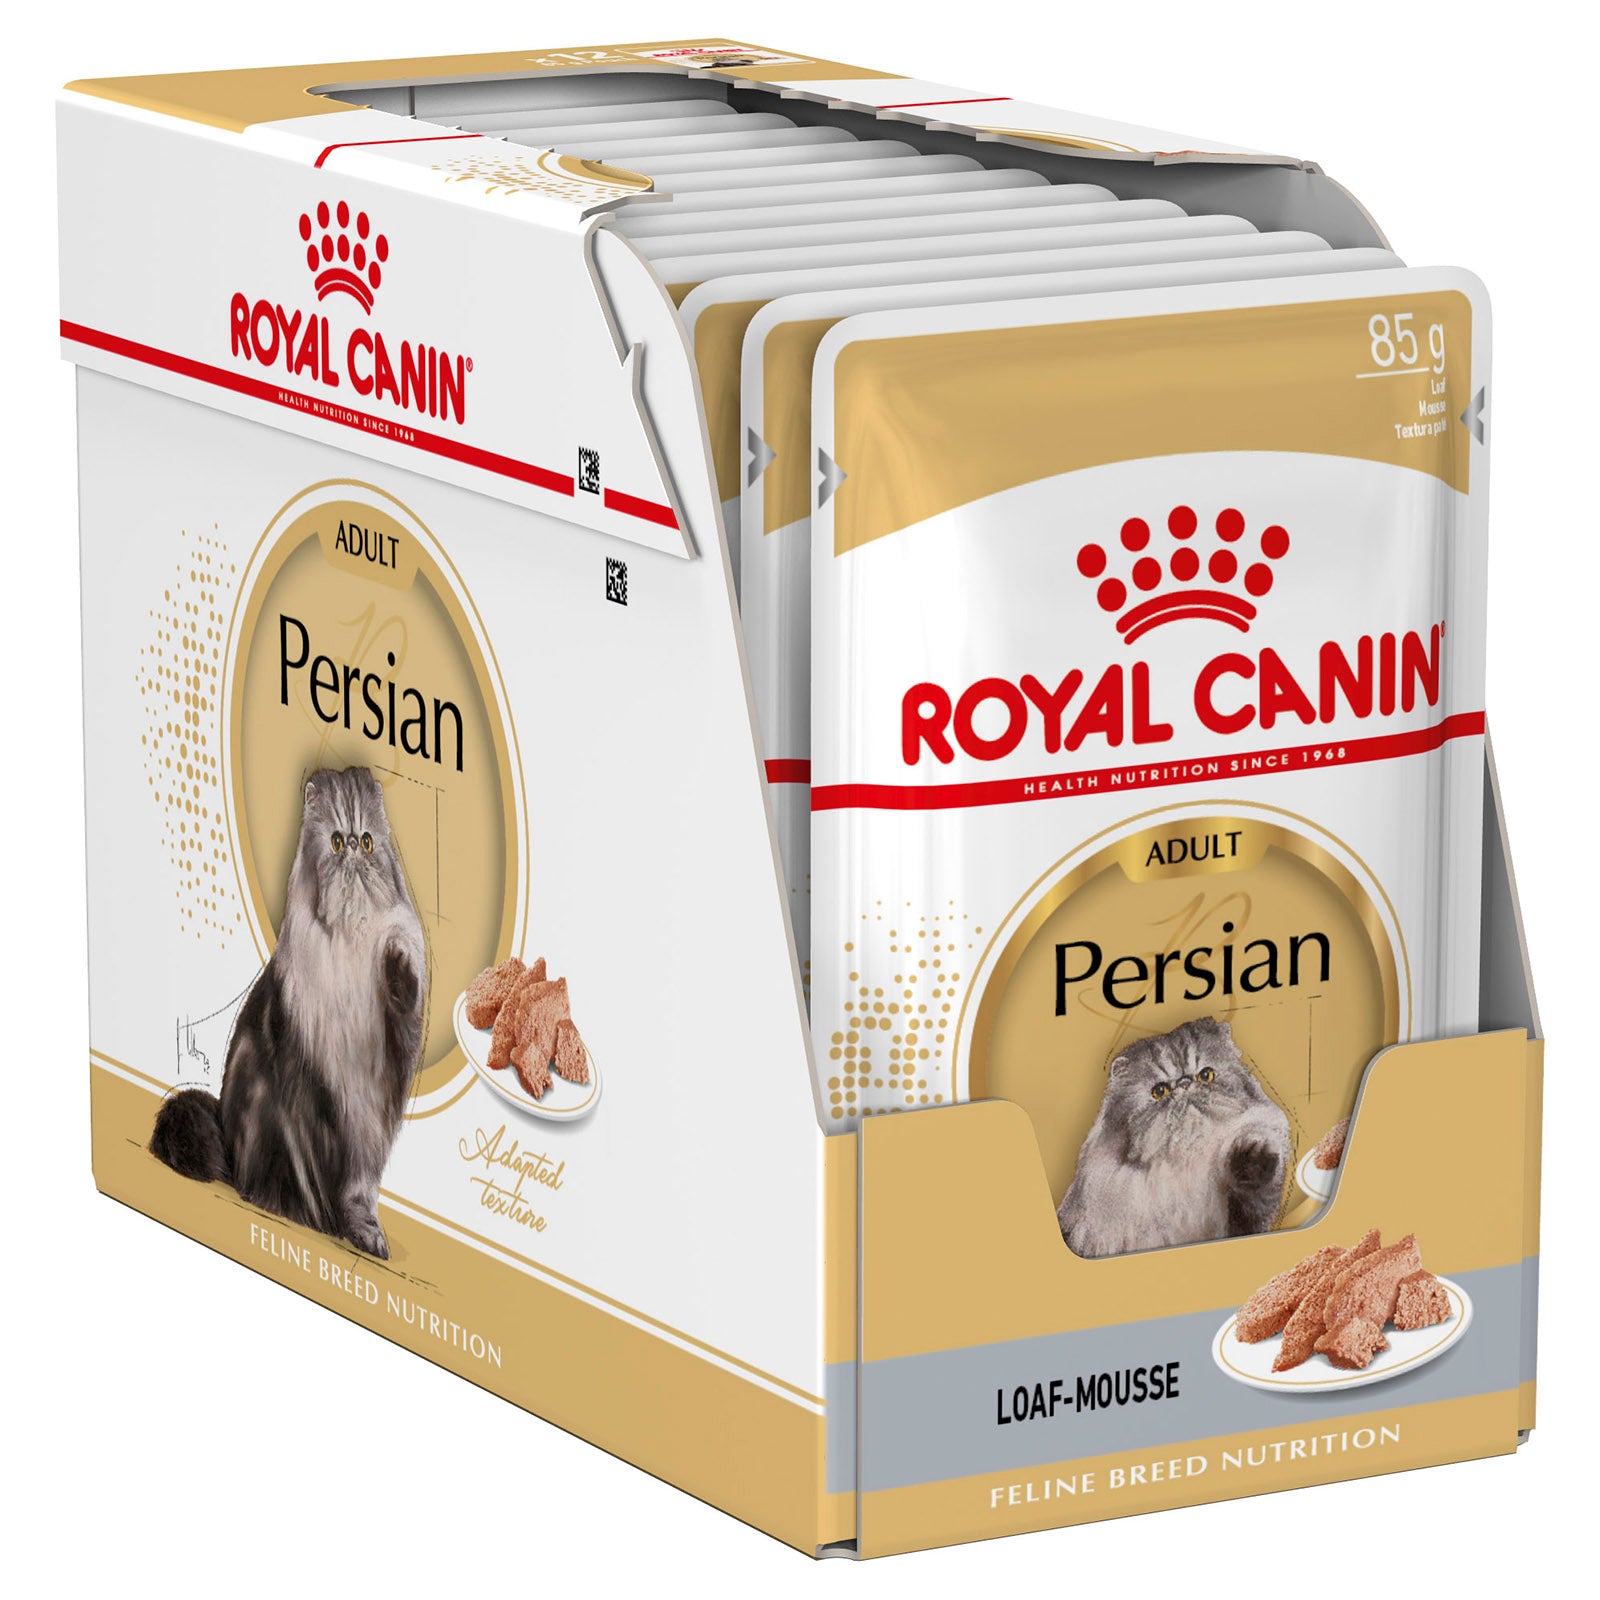 Royal Canin Cat Food Pouch Adult Persian